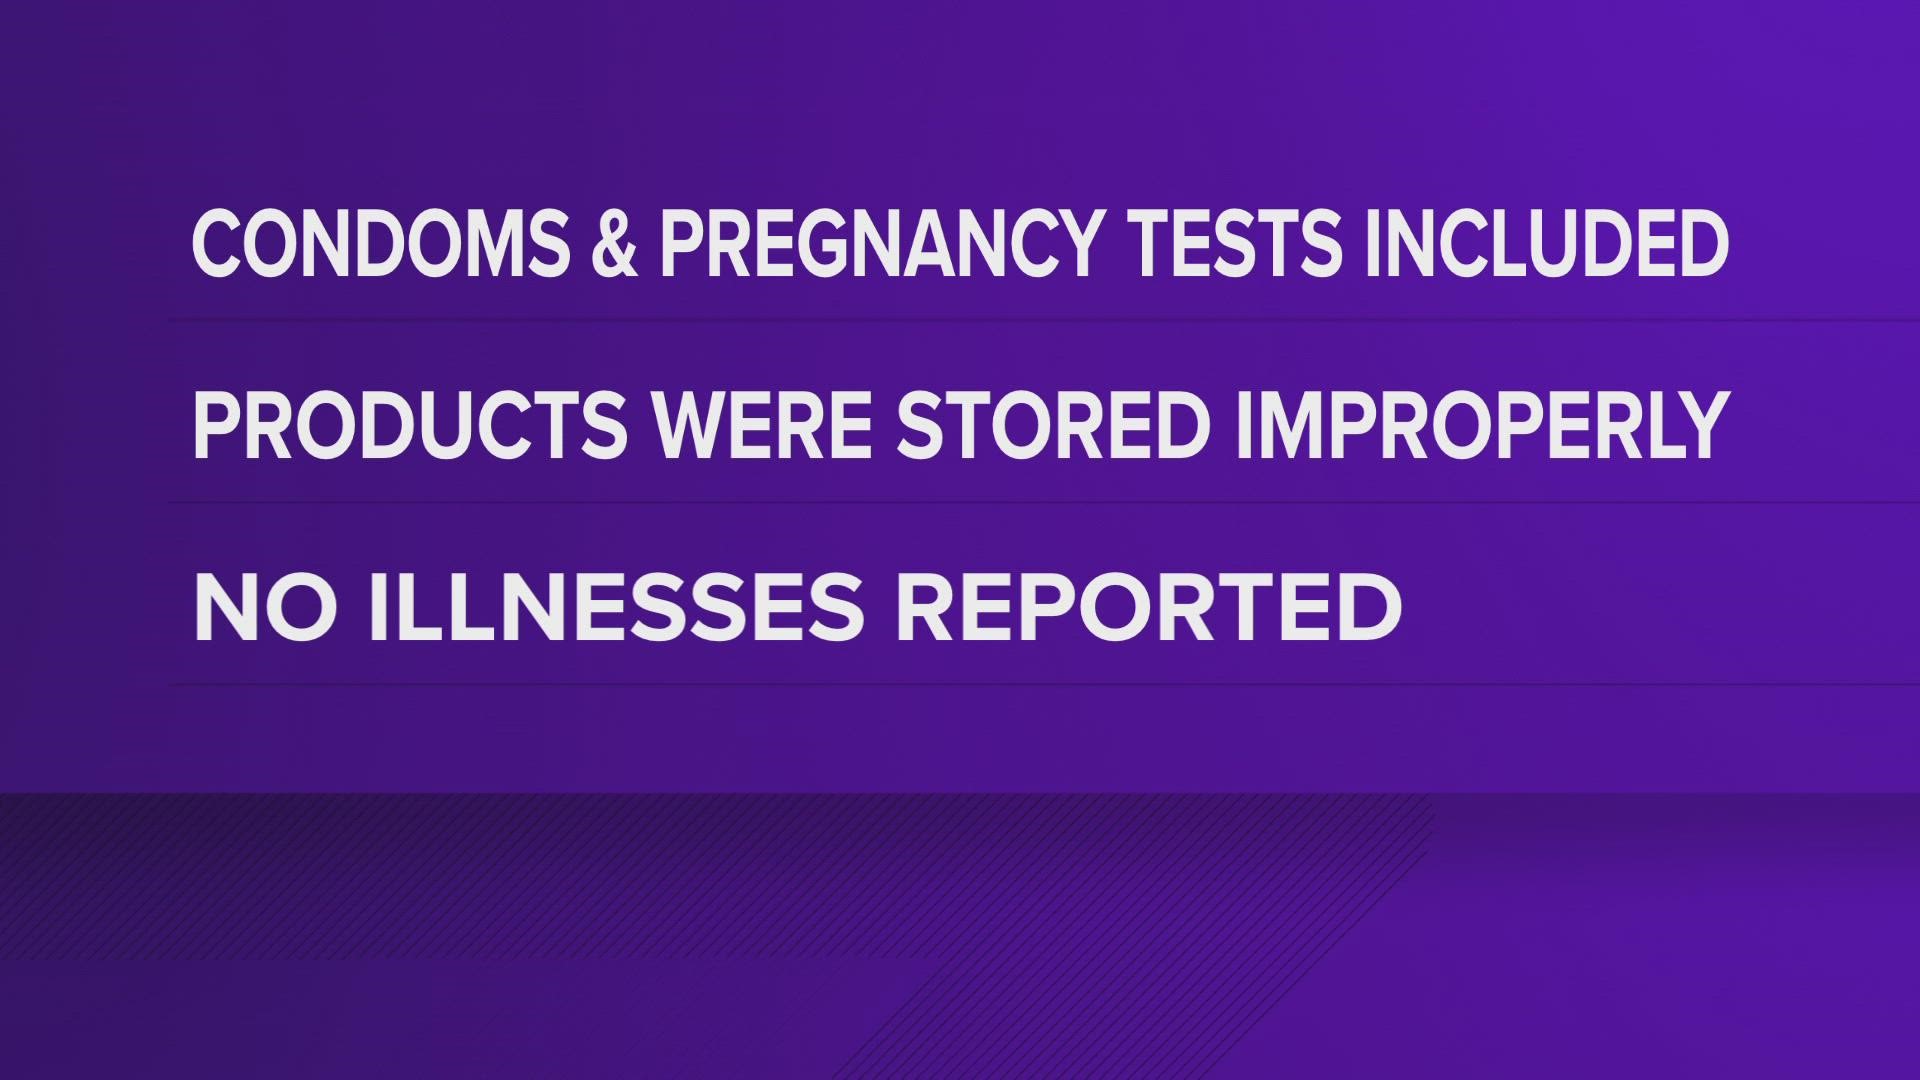 Family Dollar said the recalled products were stored improperly, but isn't aware of any adverse events or illnesses so far.